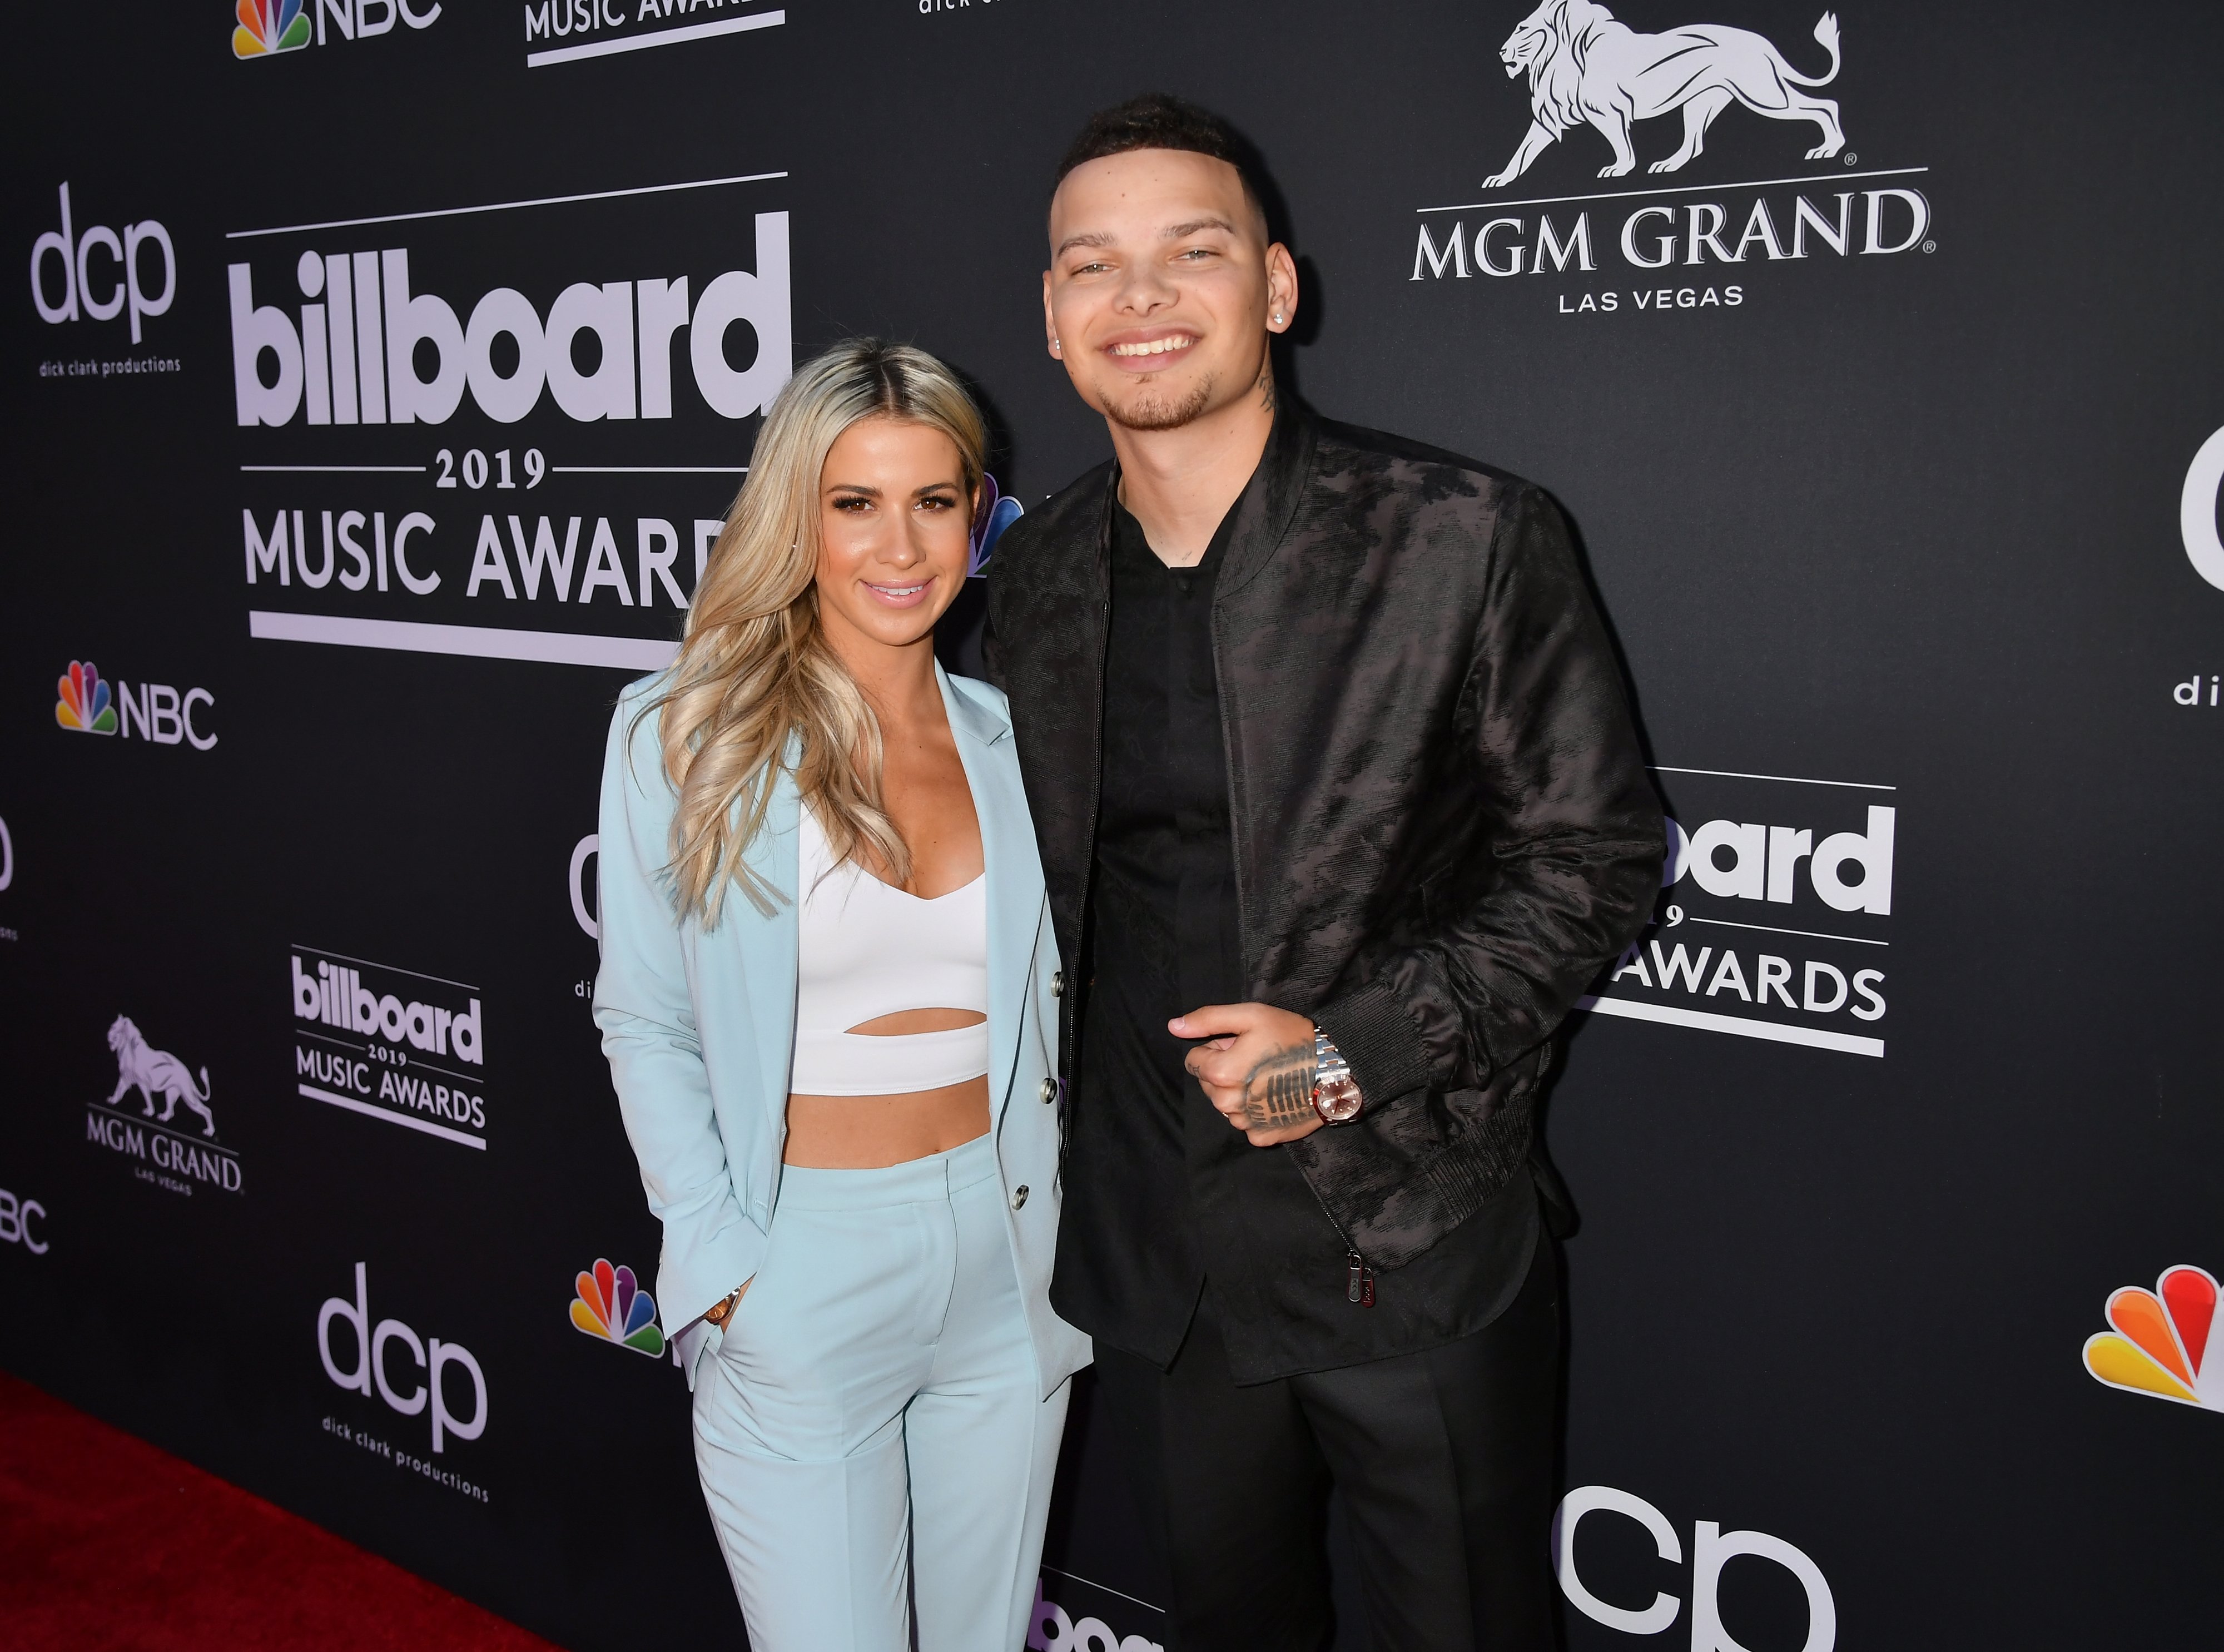 Katelyn Jae and Kane Brown attend the 2019 Billboard Music Awards at MGM Grand Garden Arena on May 1, 2019, in Las Vegas, Nevada. | Source: Getty Images